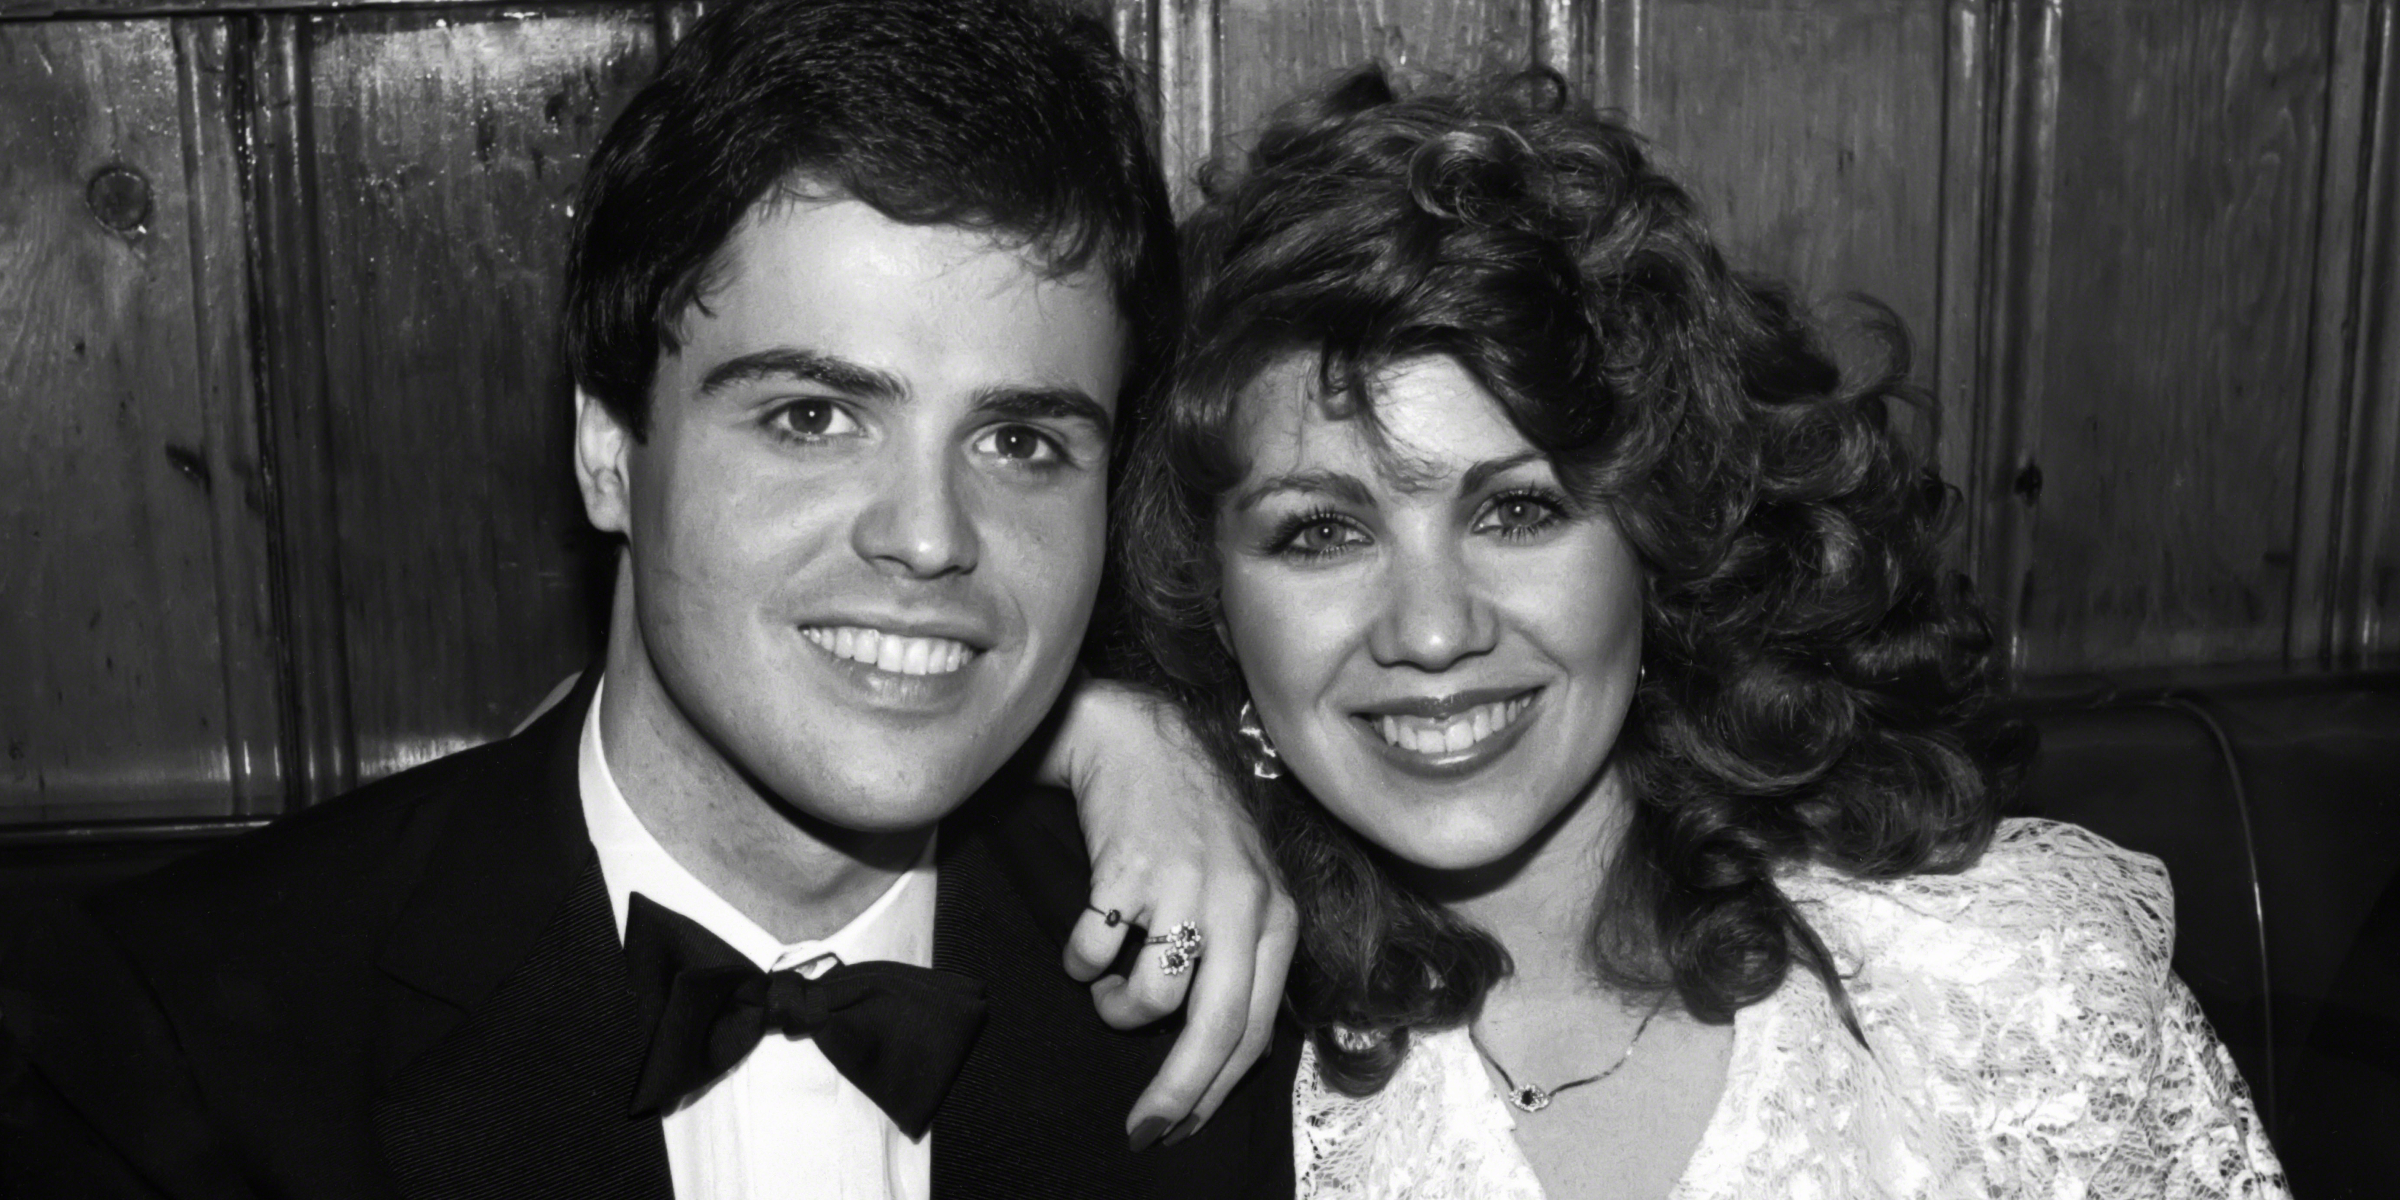 Donny and Debbie Osmond | Source: Getty Images